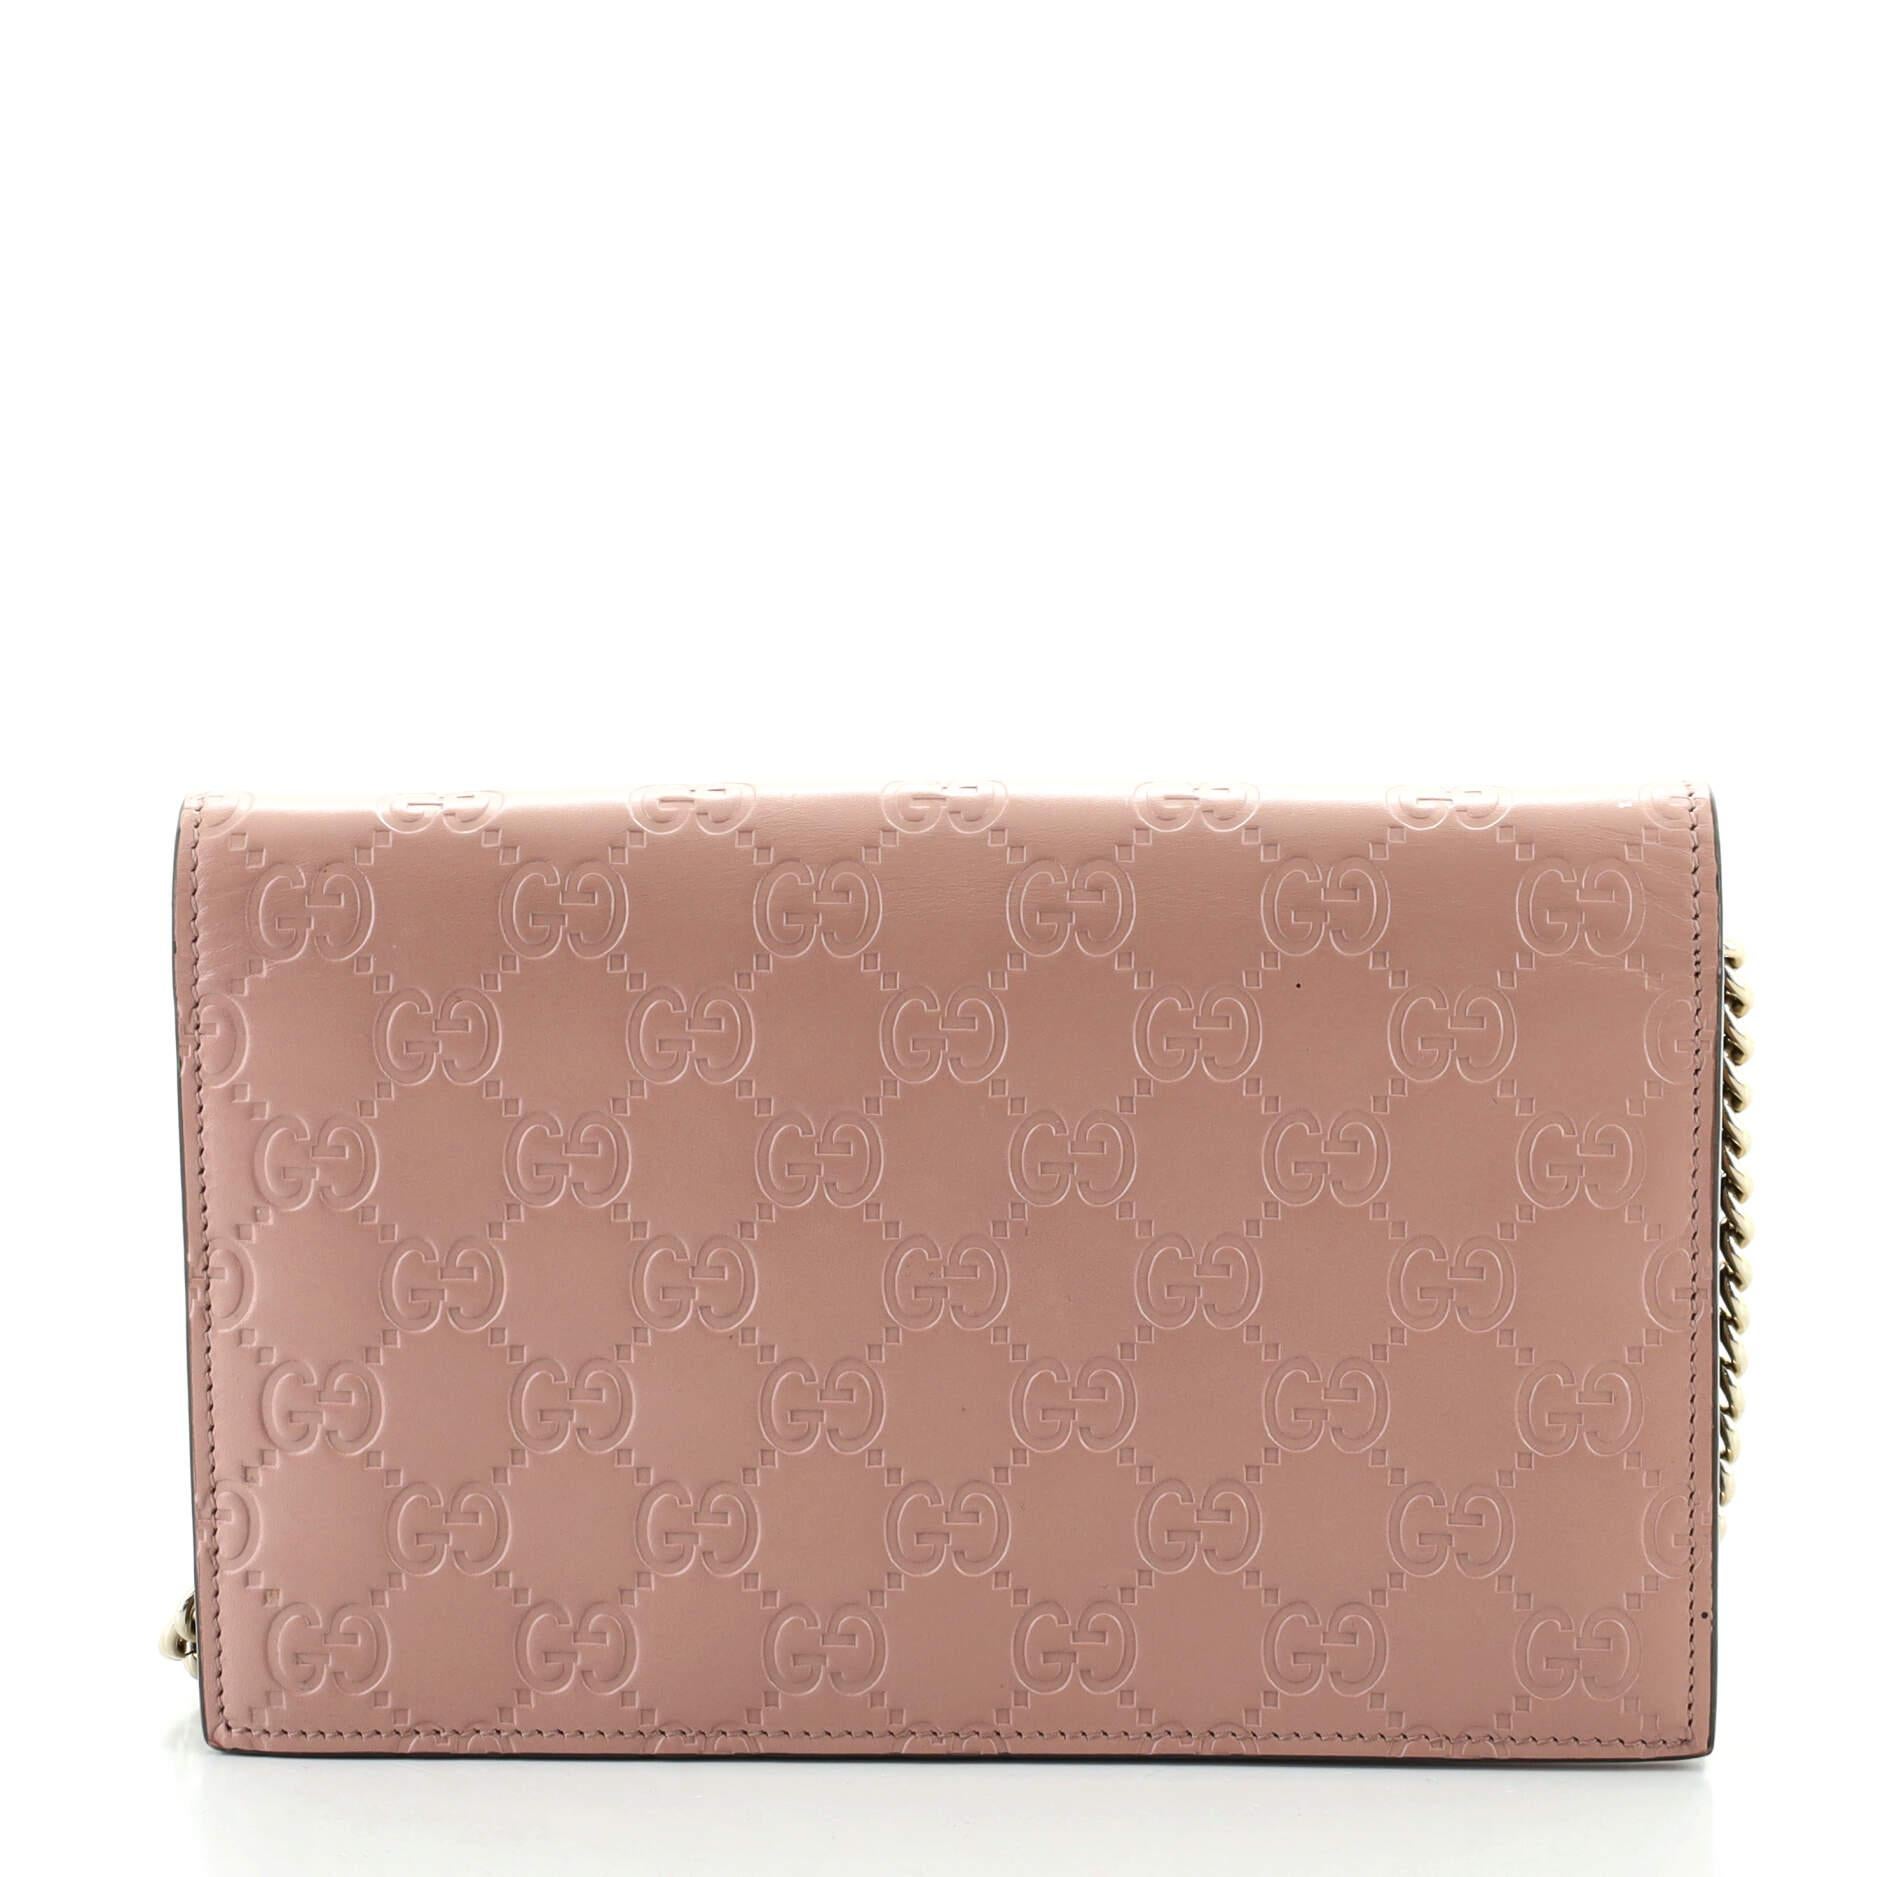 Brown Gucci Signature Wallet on Chain Guccissima Leather